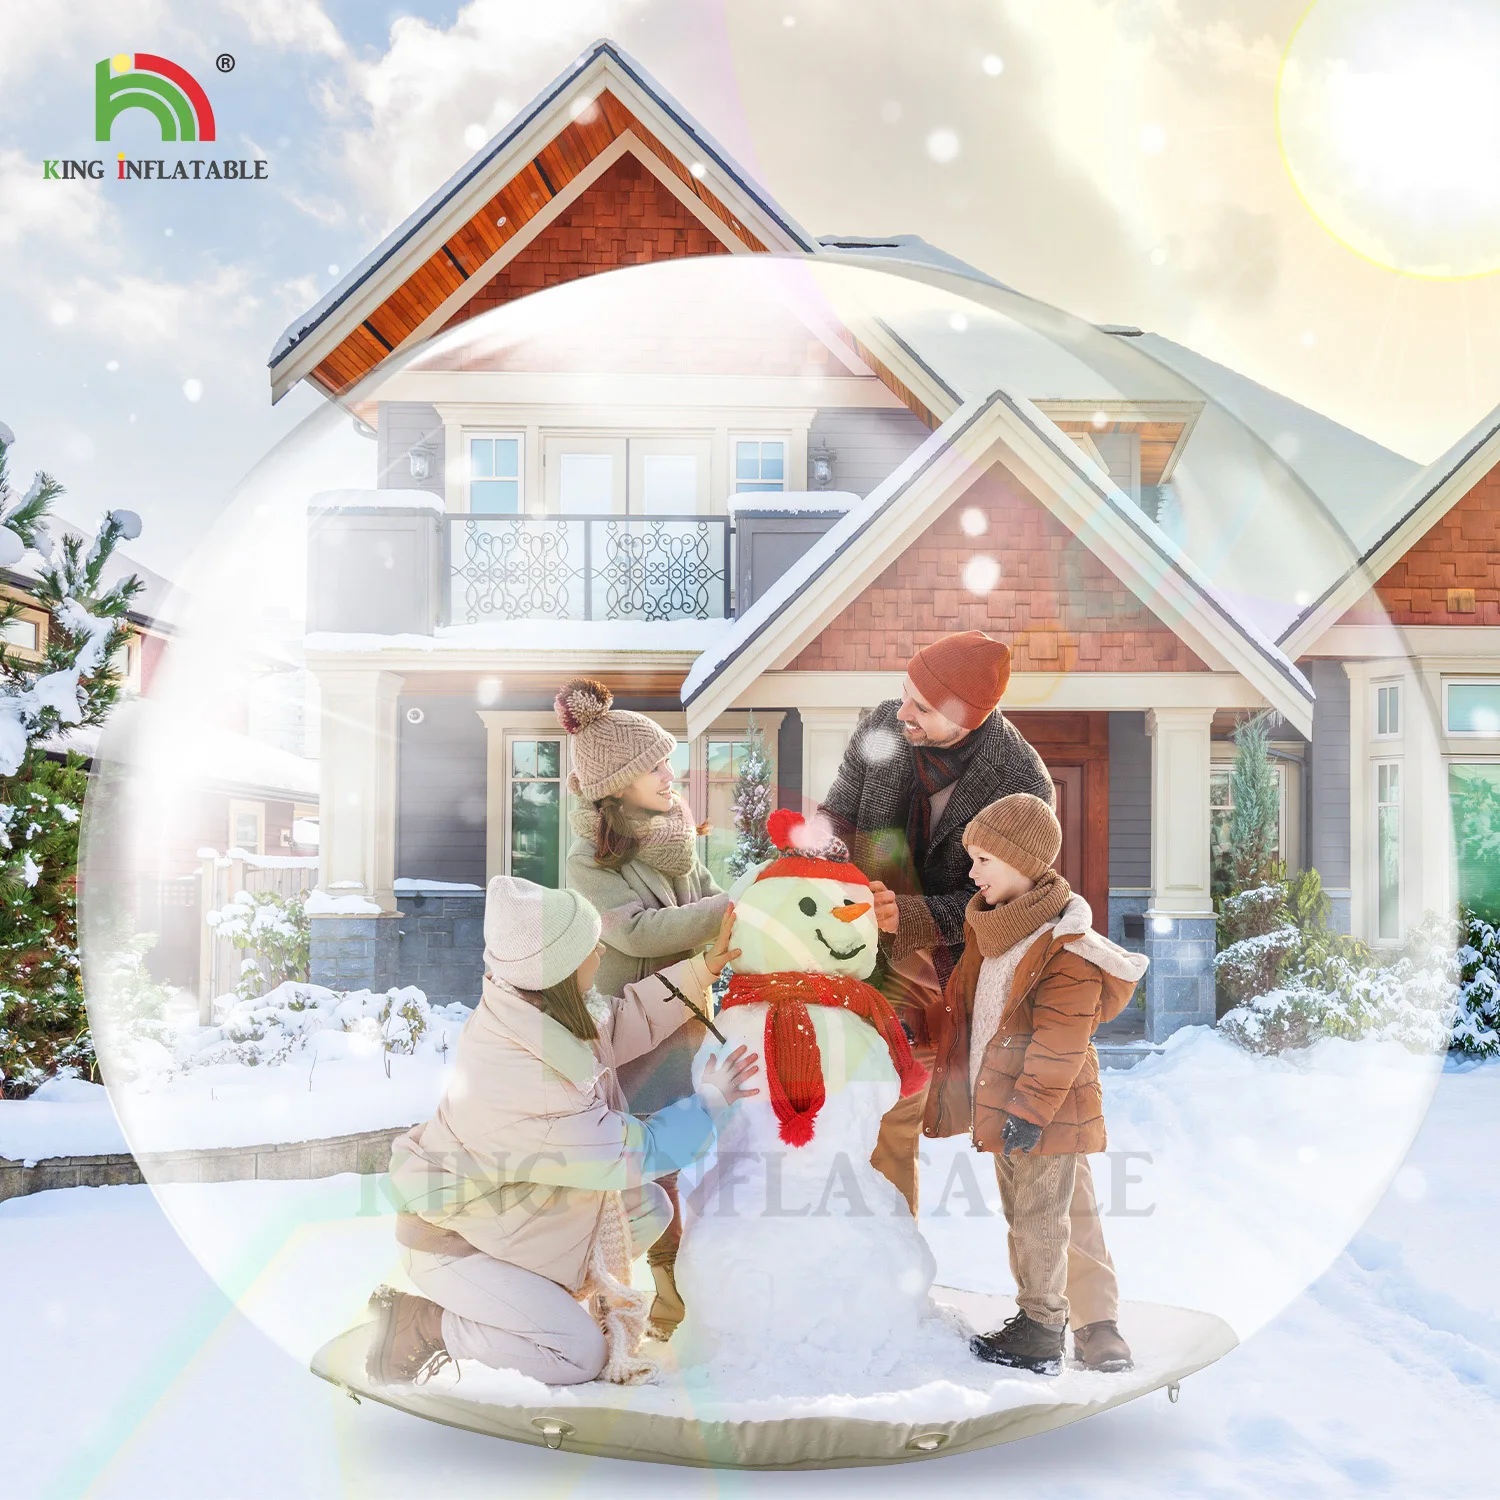 10ft/3m PVC Transparent Bubble Tent Giant Inflatable Snowball Christmas Snow Globe Dome Xmas Outdoor Decoration With Blower winter used outdoor geodesic dome glamping tent snow resistant camping house tent